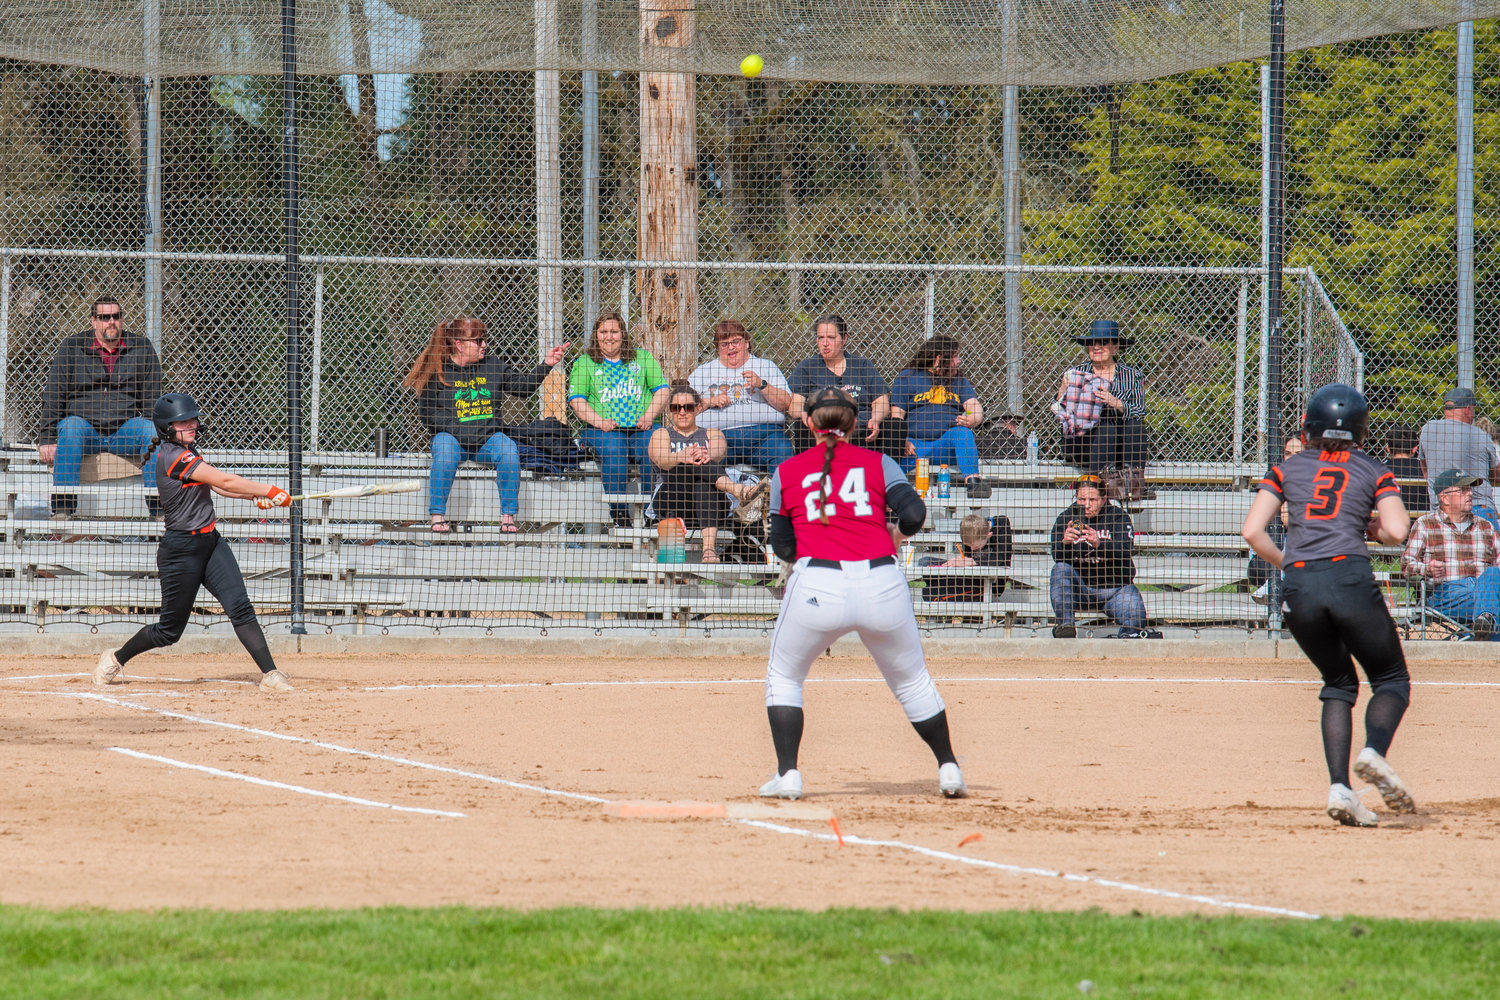 Centralia’s Jadyn Hawley (2) sends the ball up with a swing during a game against the Bearcats Wednesday afternoon.